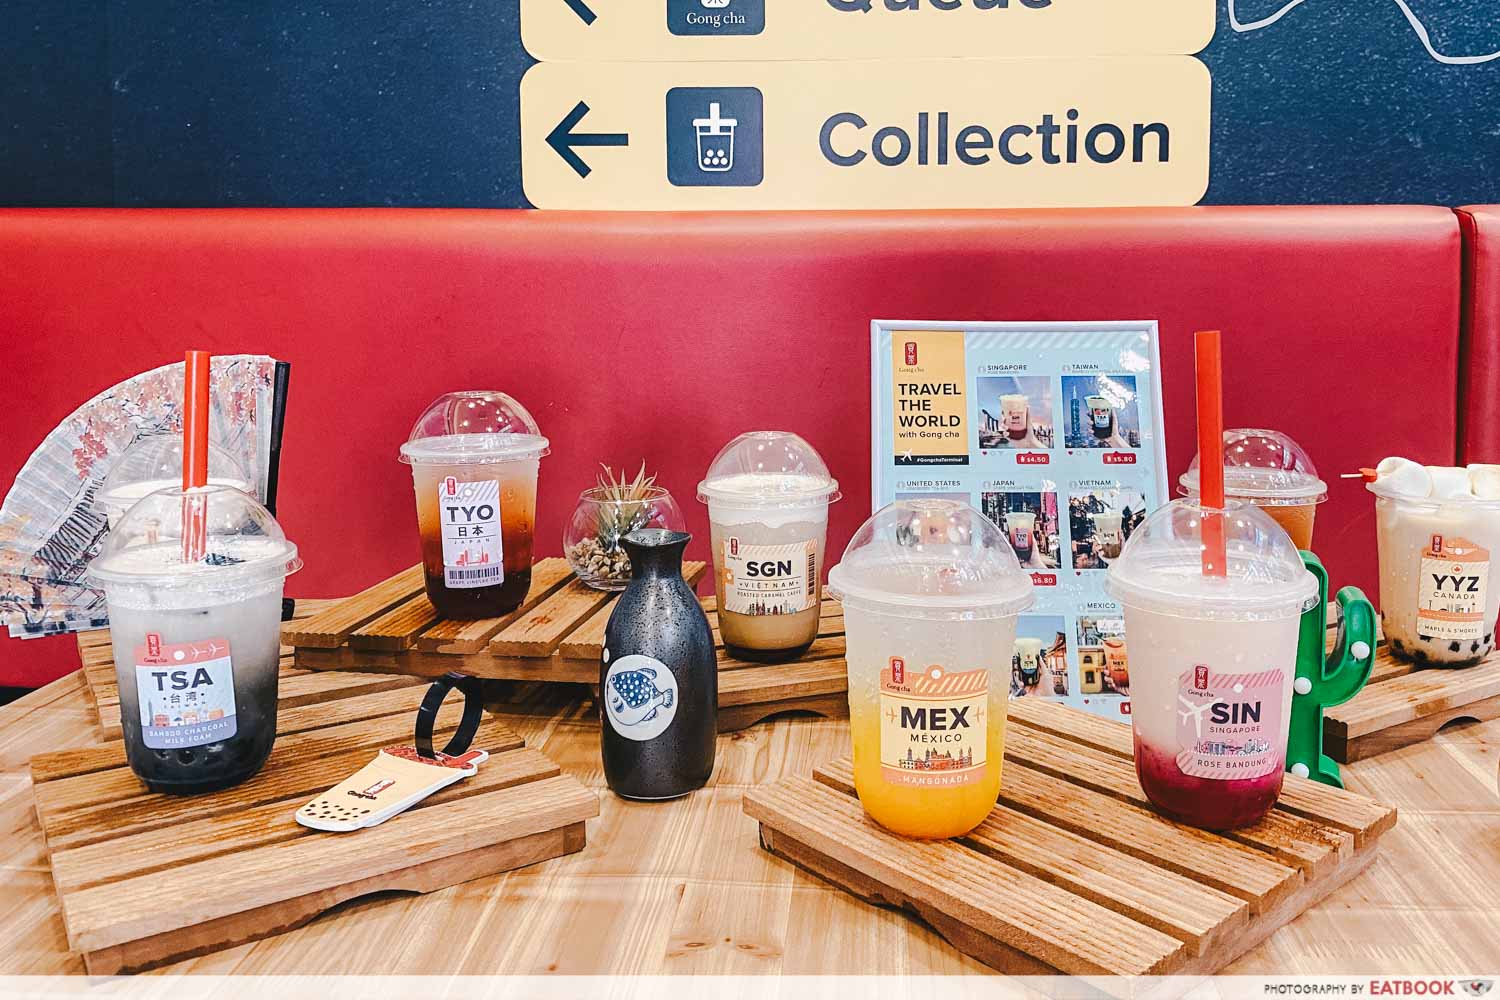 gong cha travel inspired bubble tea intro